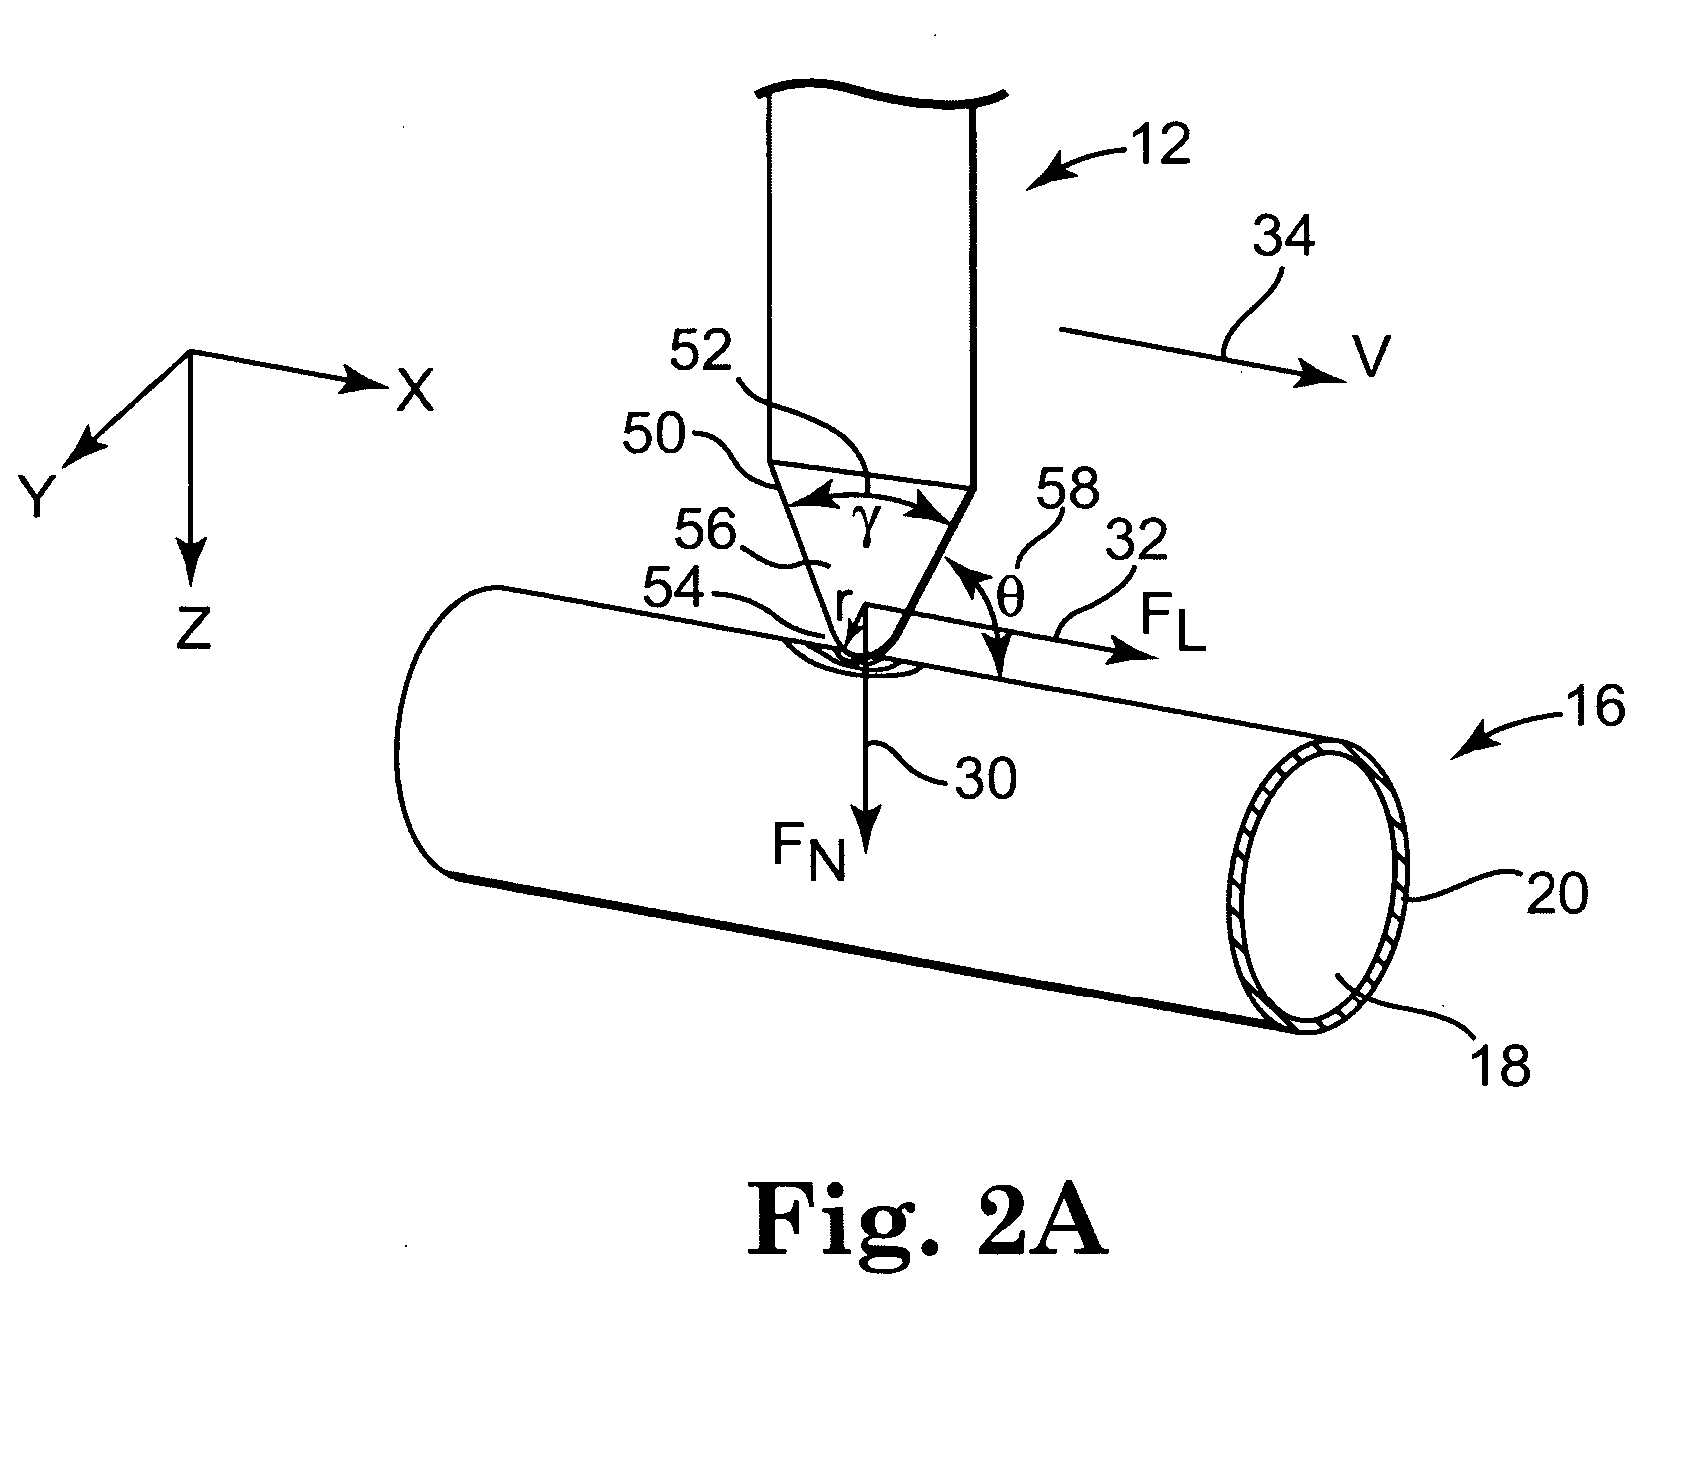 Method of measuring interfacial adhesion properties of stents